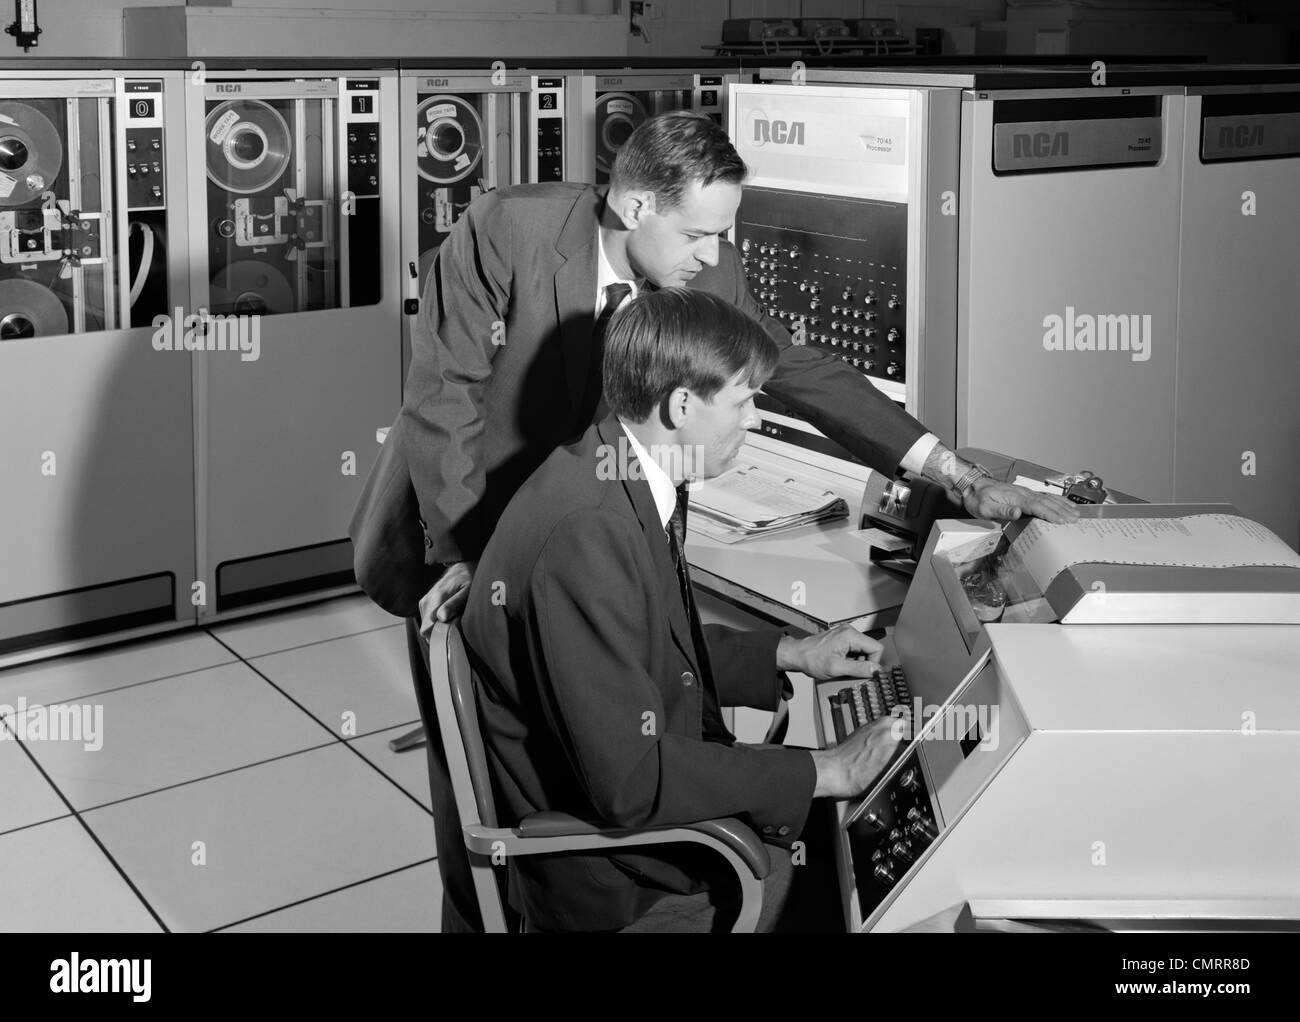 1960s TWO BUSINESSMAN PROGRAMMING LARGE MAINFRAME COMPUTER SURROUNDED BY DATA STORAGE TAPE DRIVES OFFICE INDOOR Stock Photo